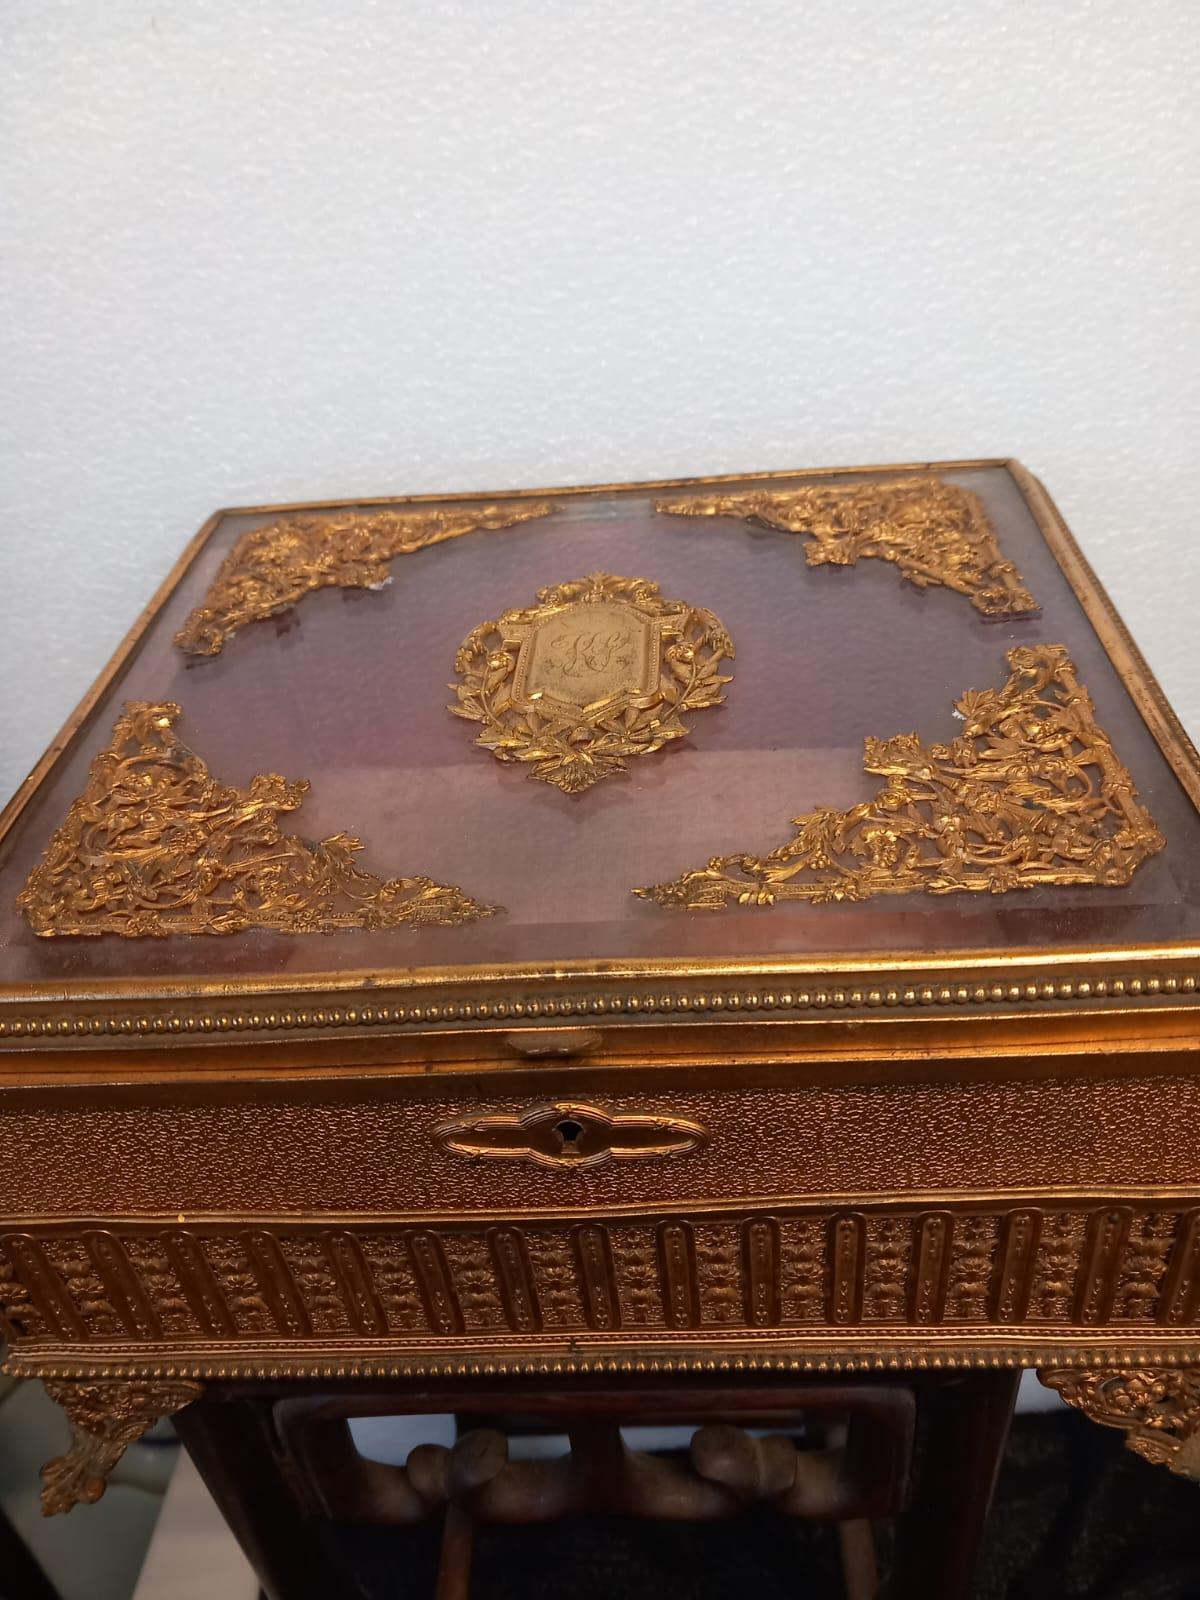 Palais Royal gilt bronze and mother of pearl jewellery casket or trinket box For Sale 1